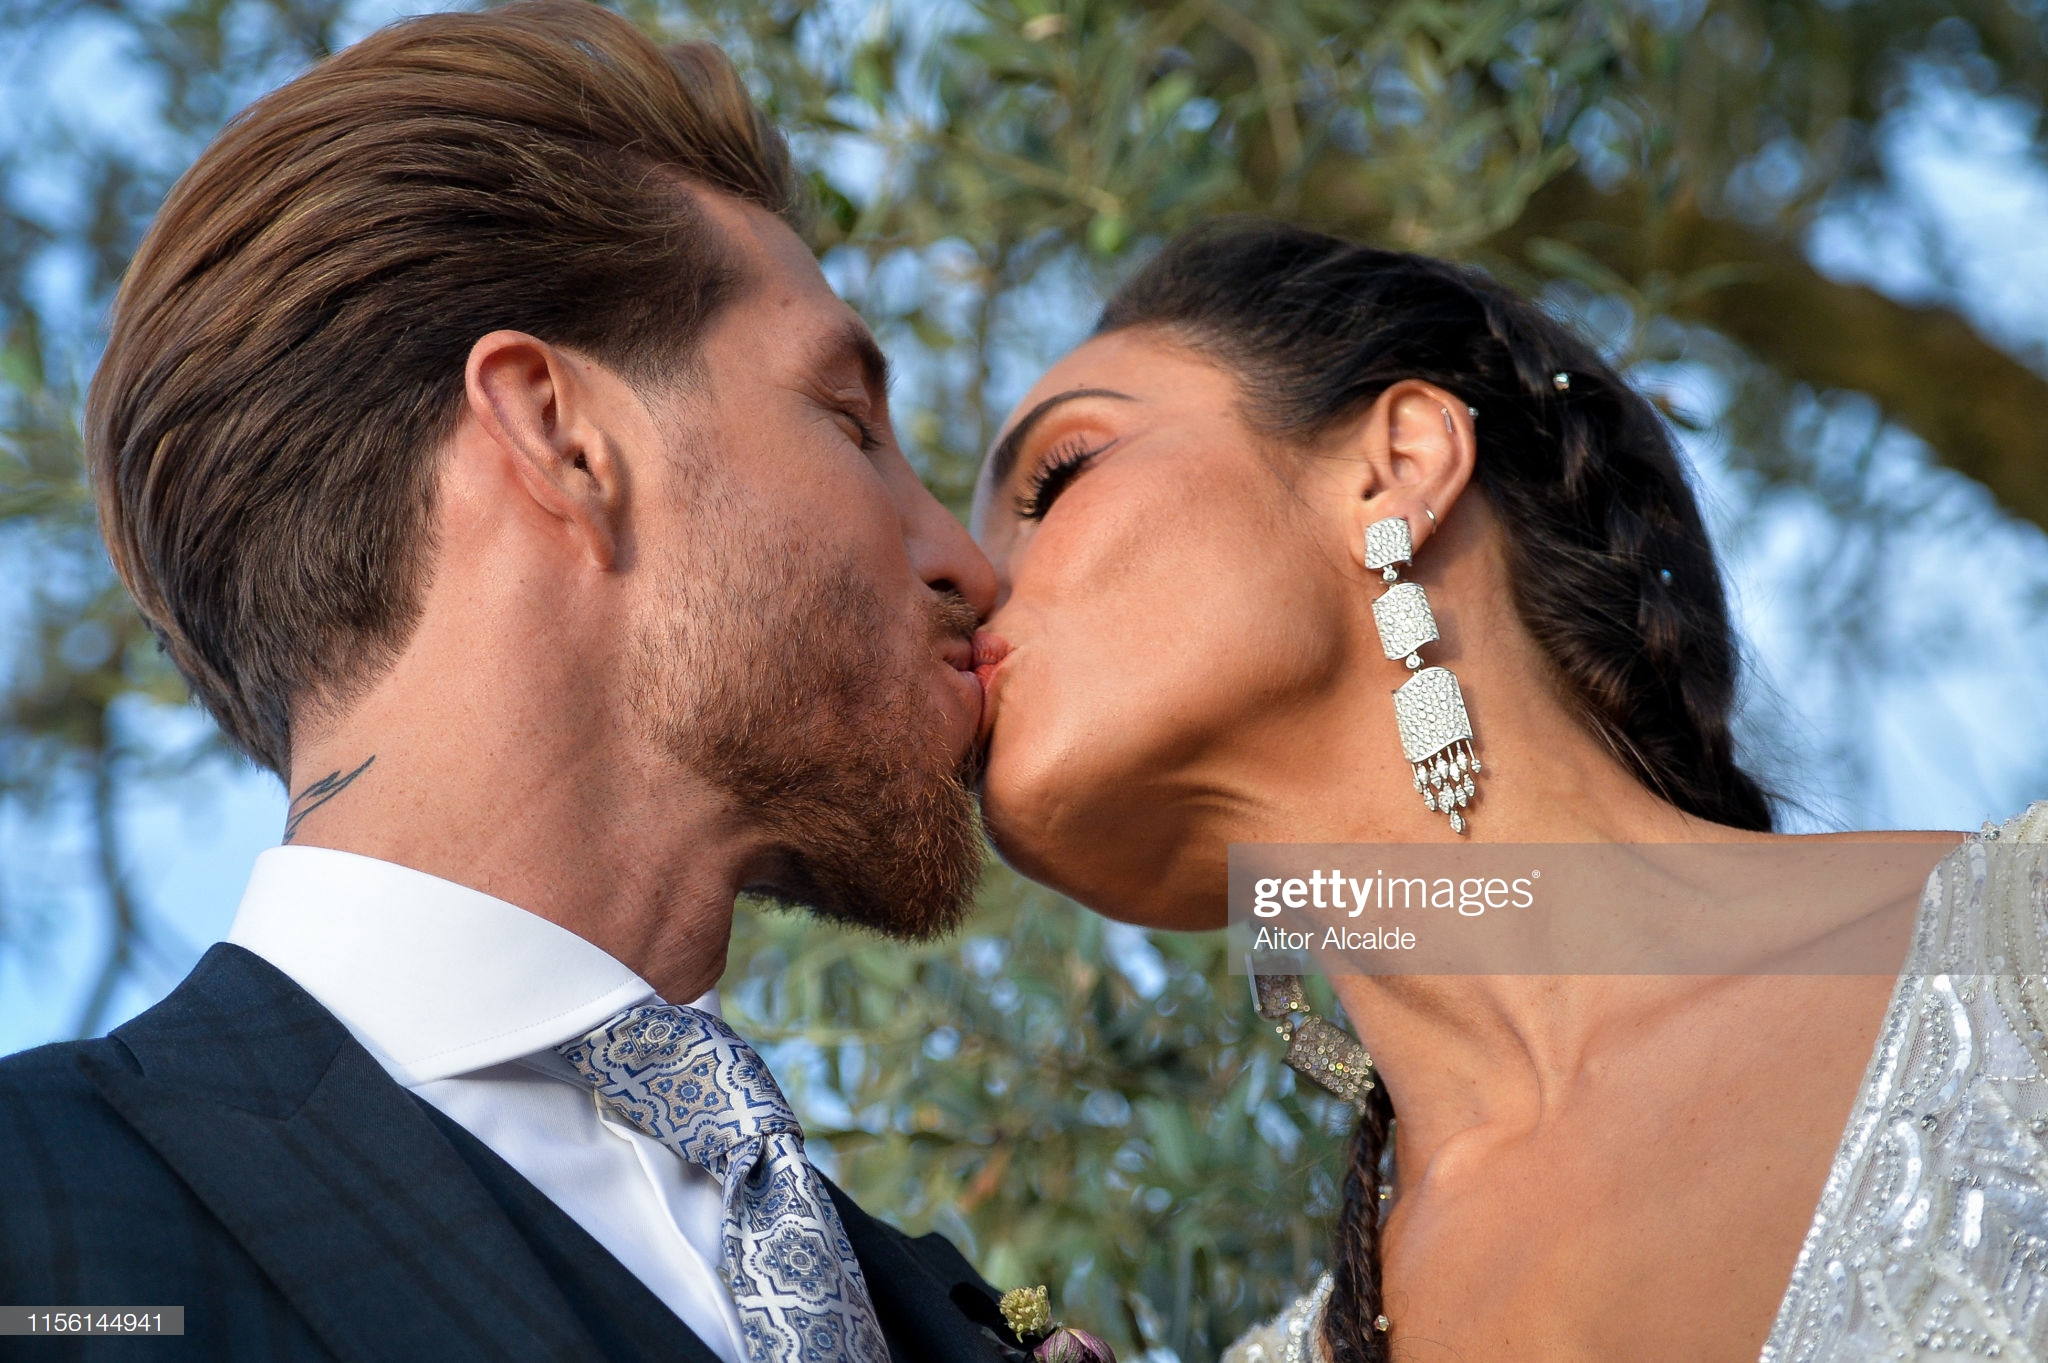 gettyimages-1156144941-2048x2048.jpg